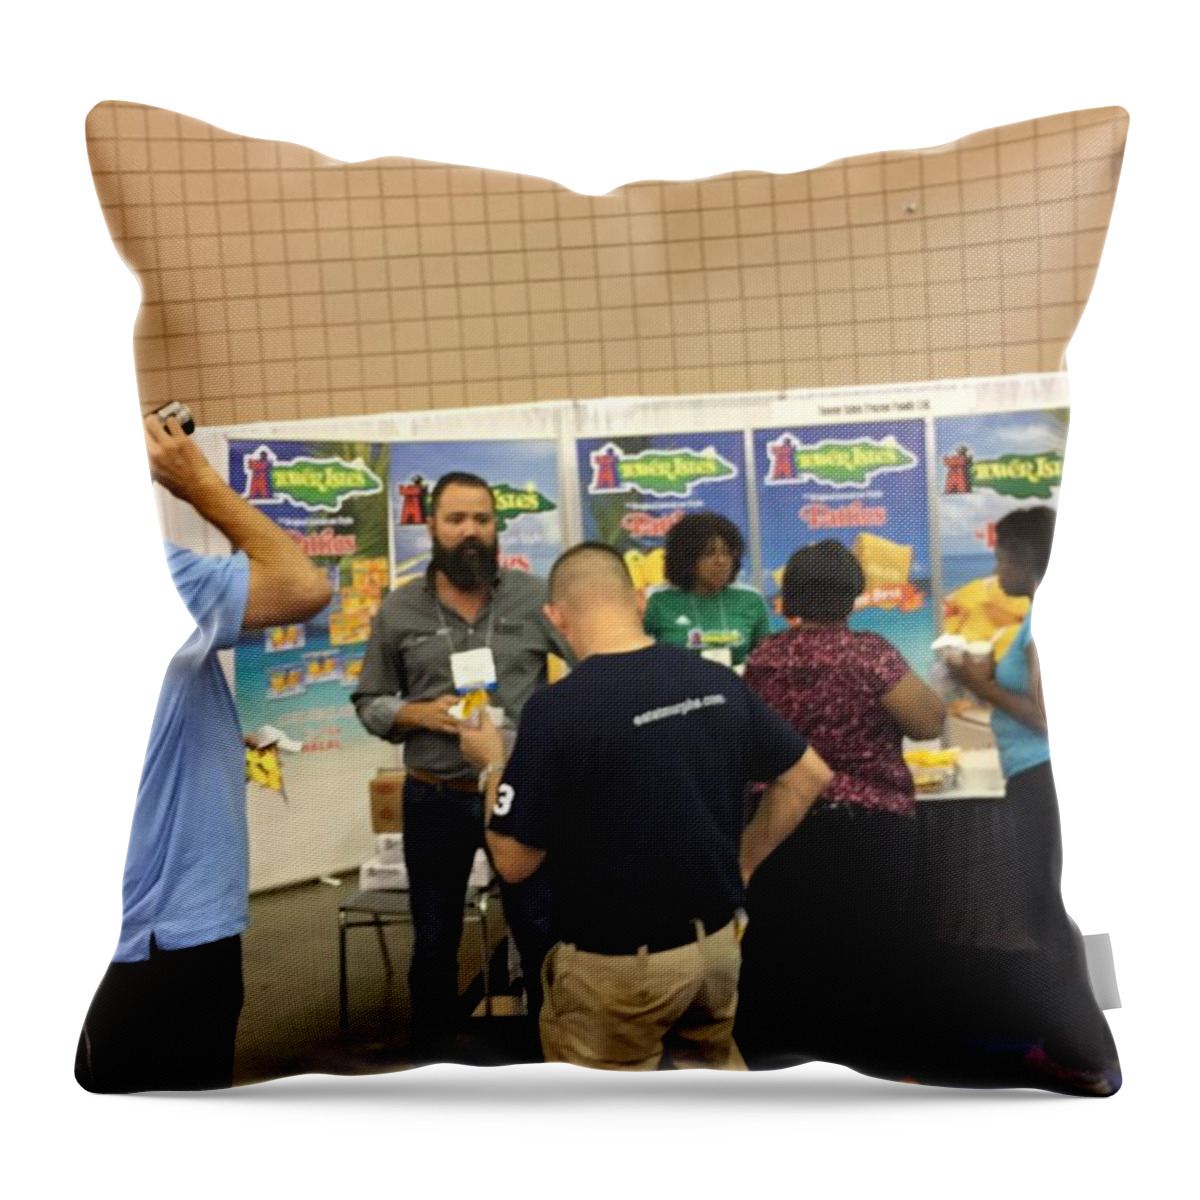 Atlanta Brave Throw Pillow featuring the photograph Dale Murphy Drinking Beer by Trevor A Smith